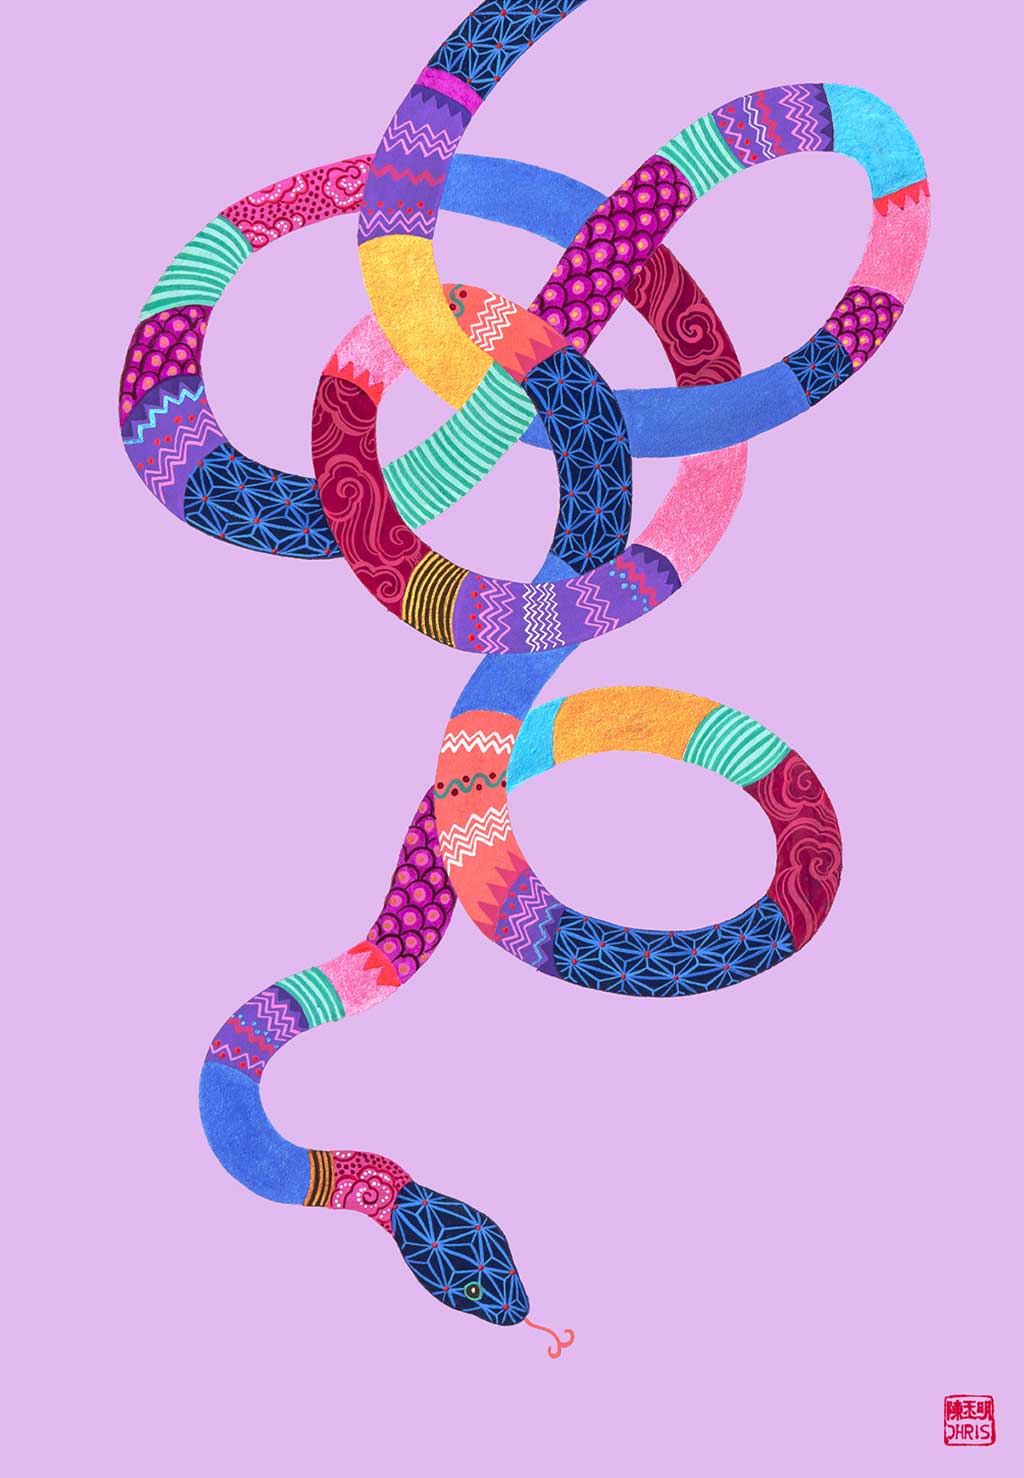 Chinese Zodiac Snake Fine Art Print by Australian Chinese Artist Chris Chun. The perfect gift for those born in 1929, 1941, 1953, 1965, 1977, 1989, 2001, 2013, 2025 as they have been created to bring good fortune, health and prosperity to their owners!